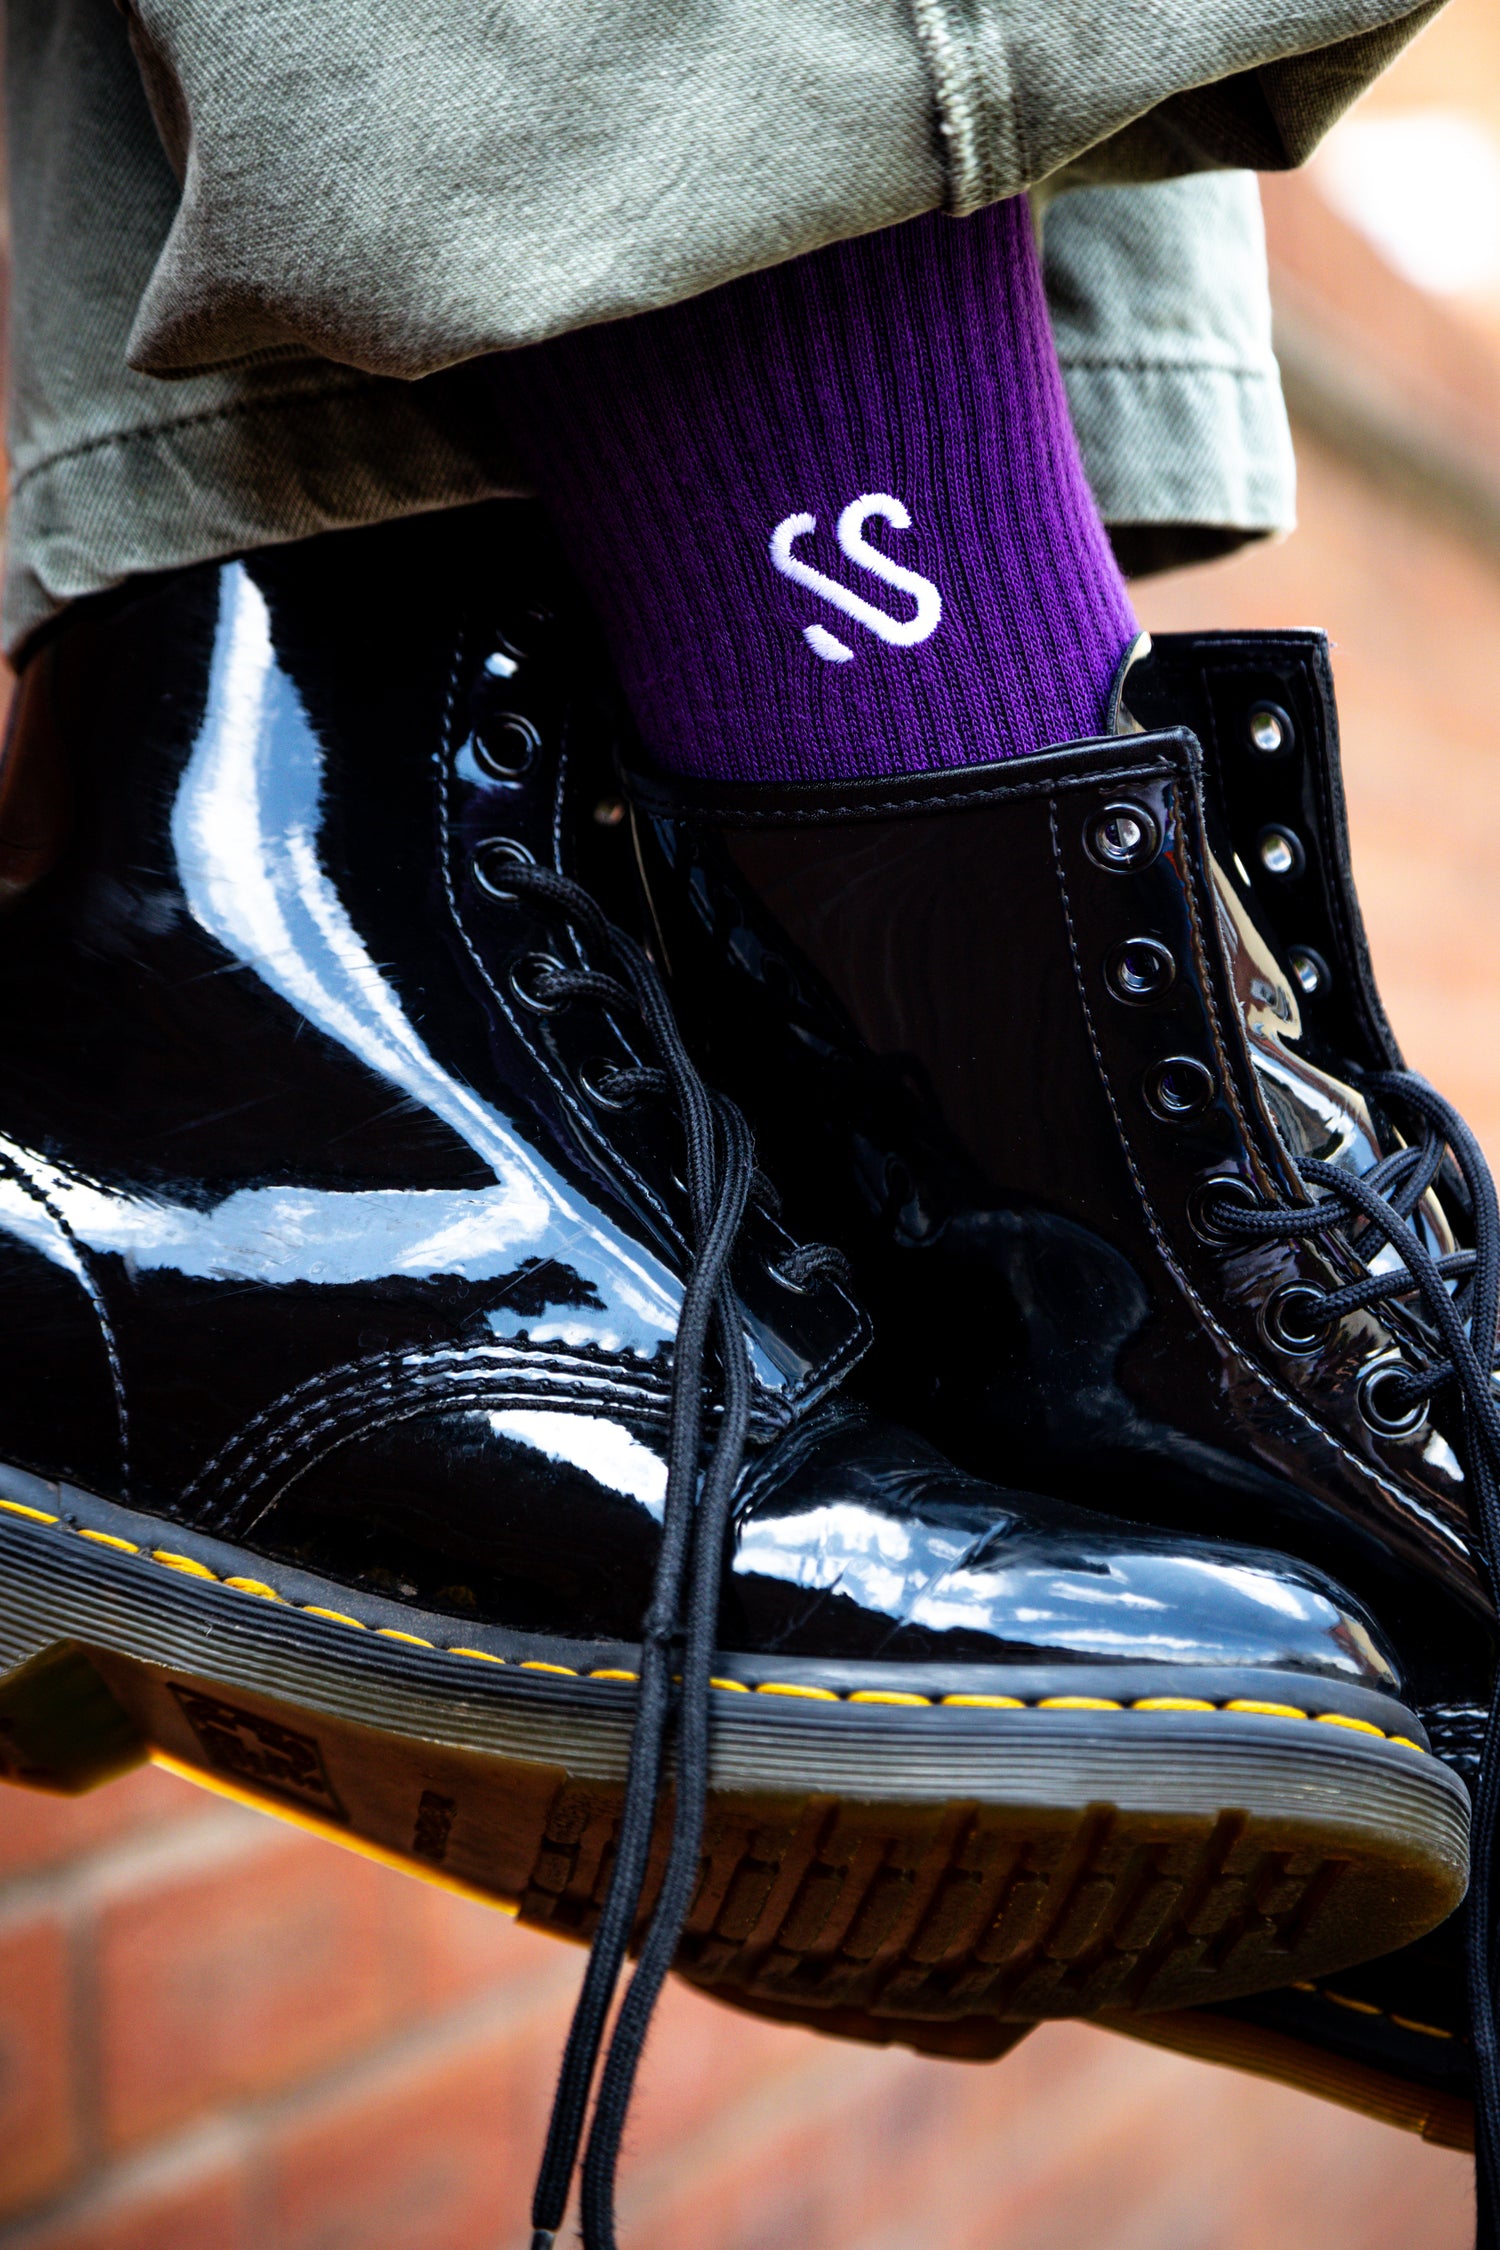 Social Socks Classic Plum Purple Being Worn On Feet With Black Boots